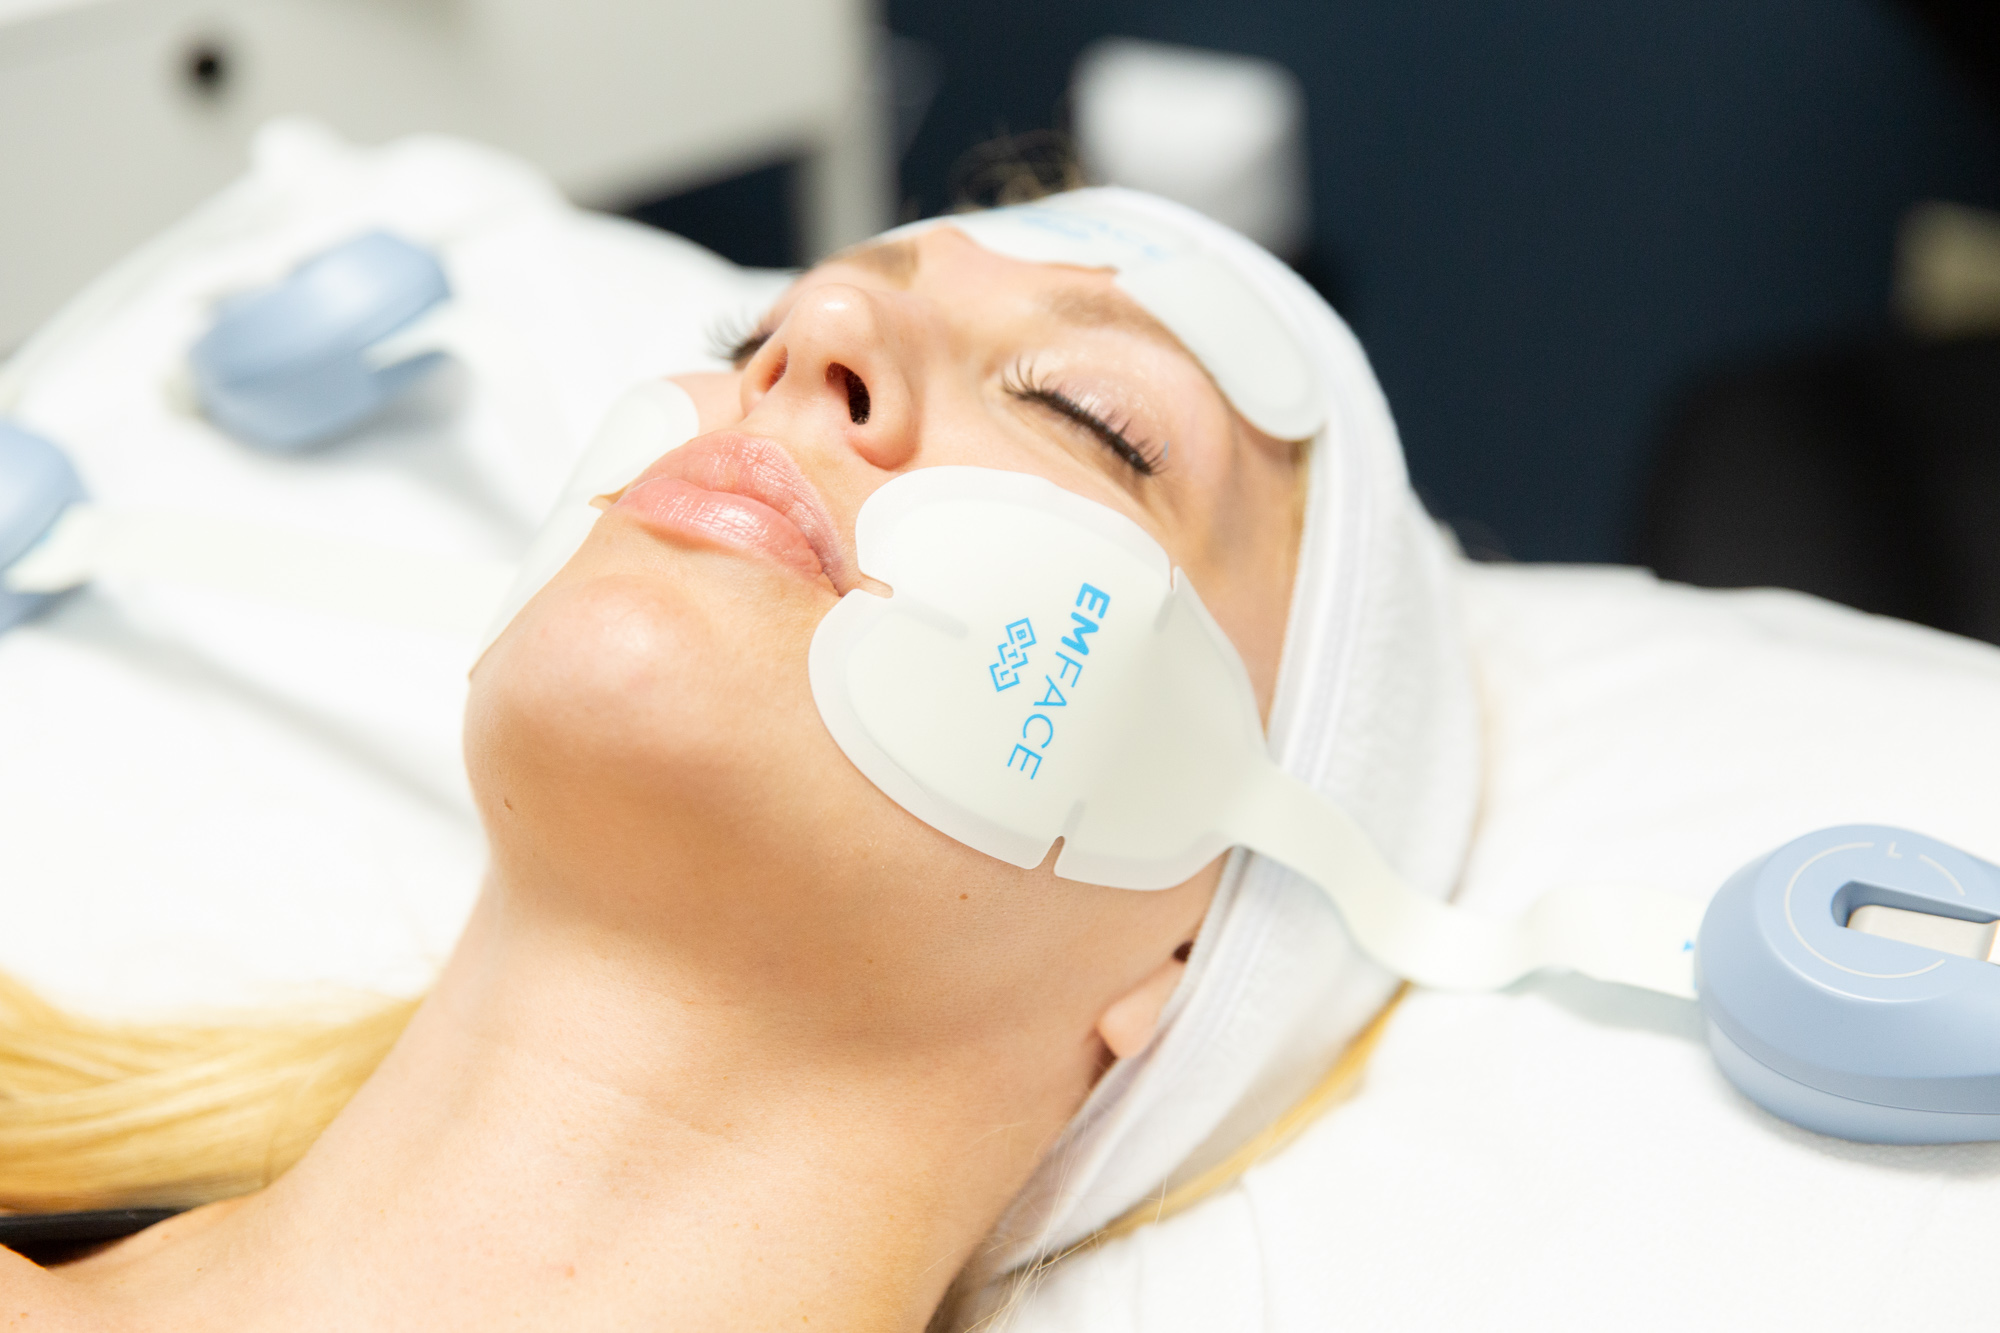 Female client relaxes with eyes closed on medical table during Emface treatment. Emface treatment patches are applied to her cheeks and forehead.